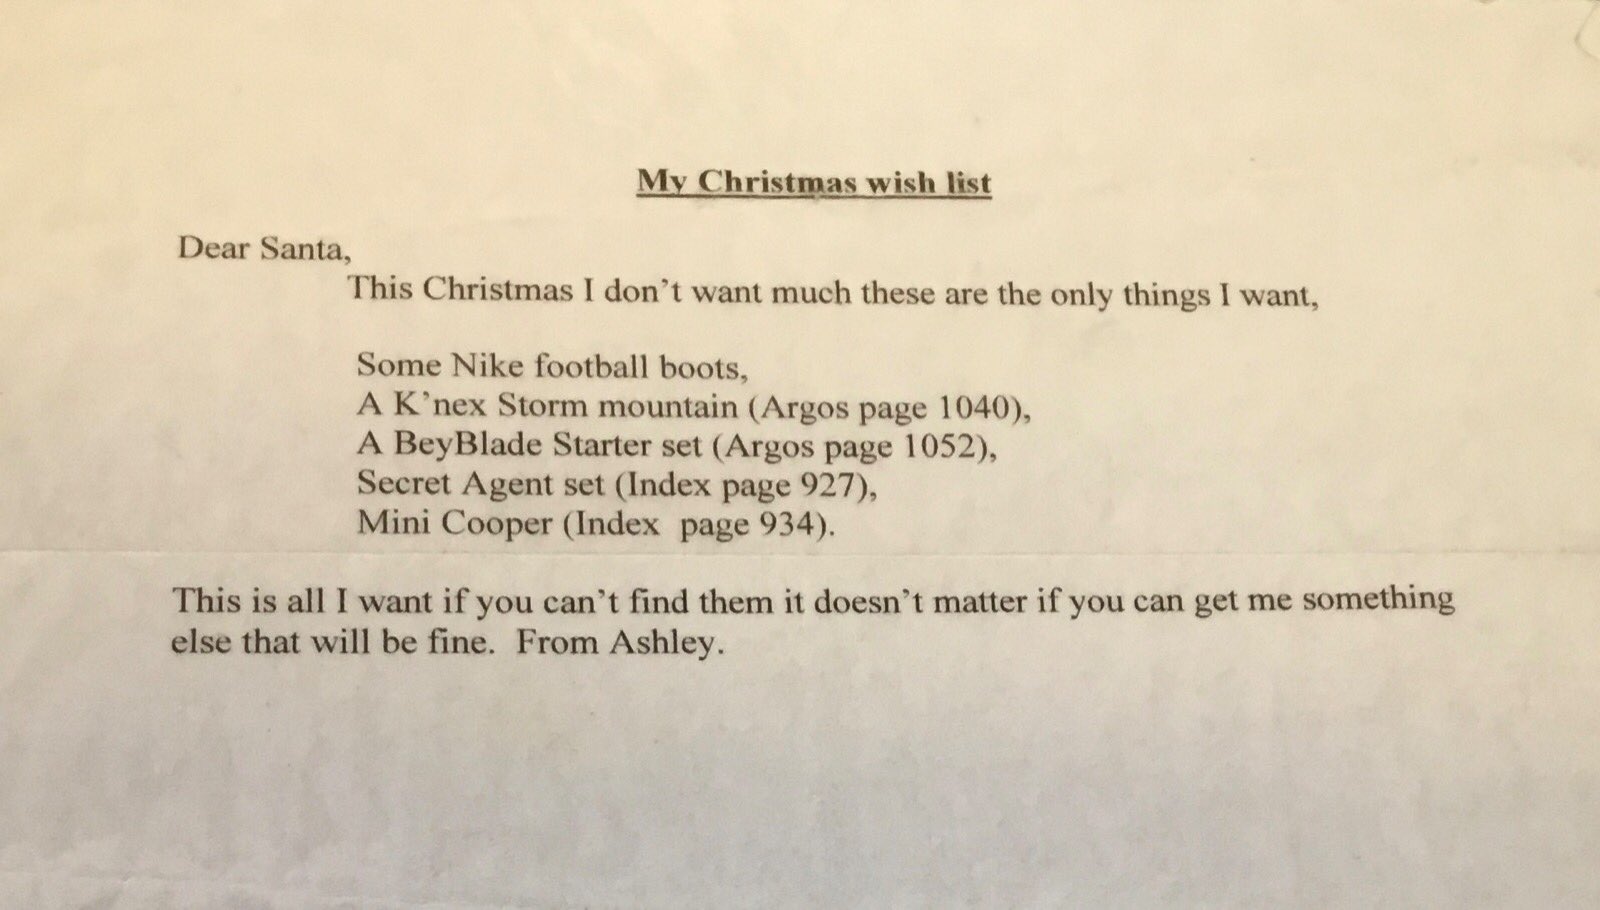 Ashley Francis-Roy Twitter: My childhood letter to Santa including Argos catalogue page numbers 😂 https://t.co/mW4NgzBCKi" / Twitter